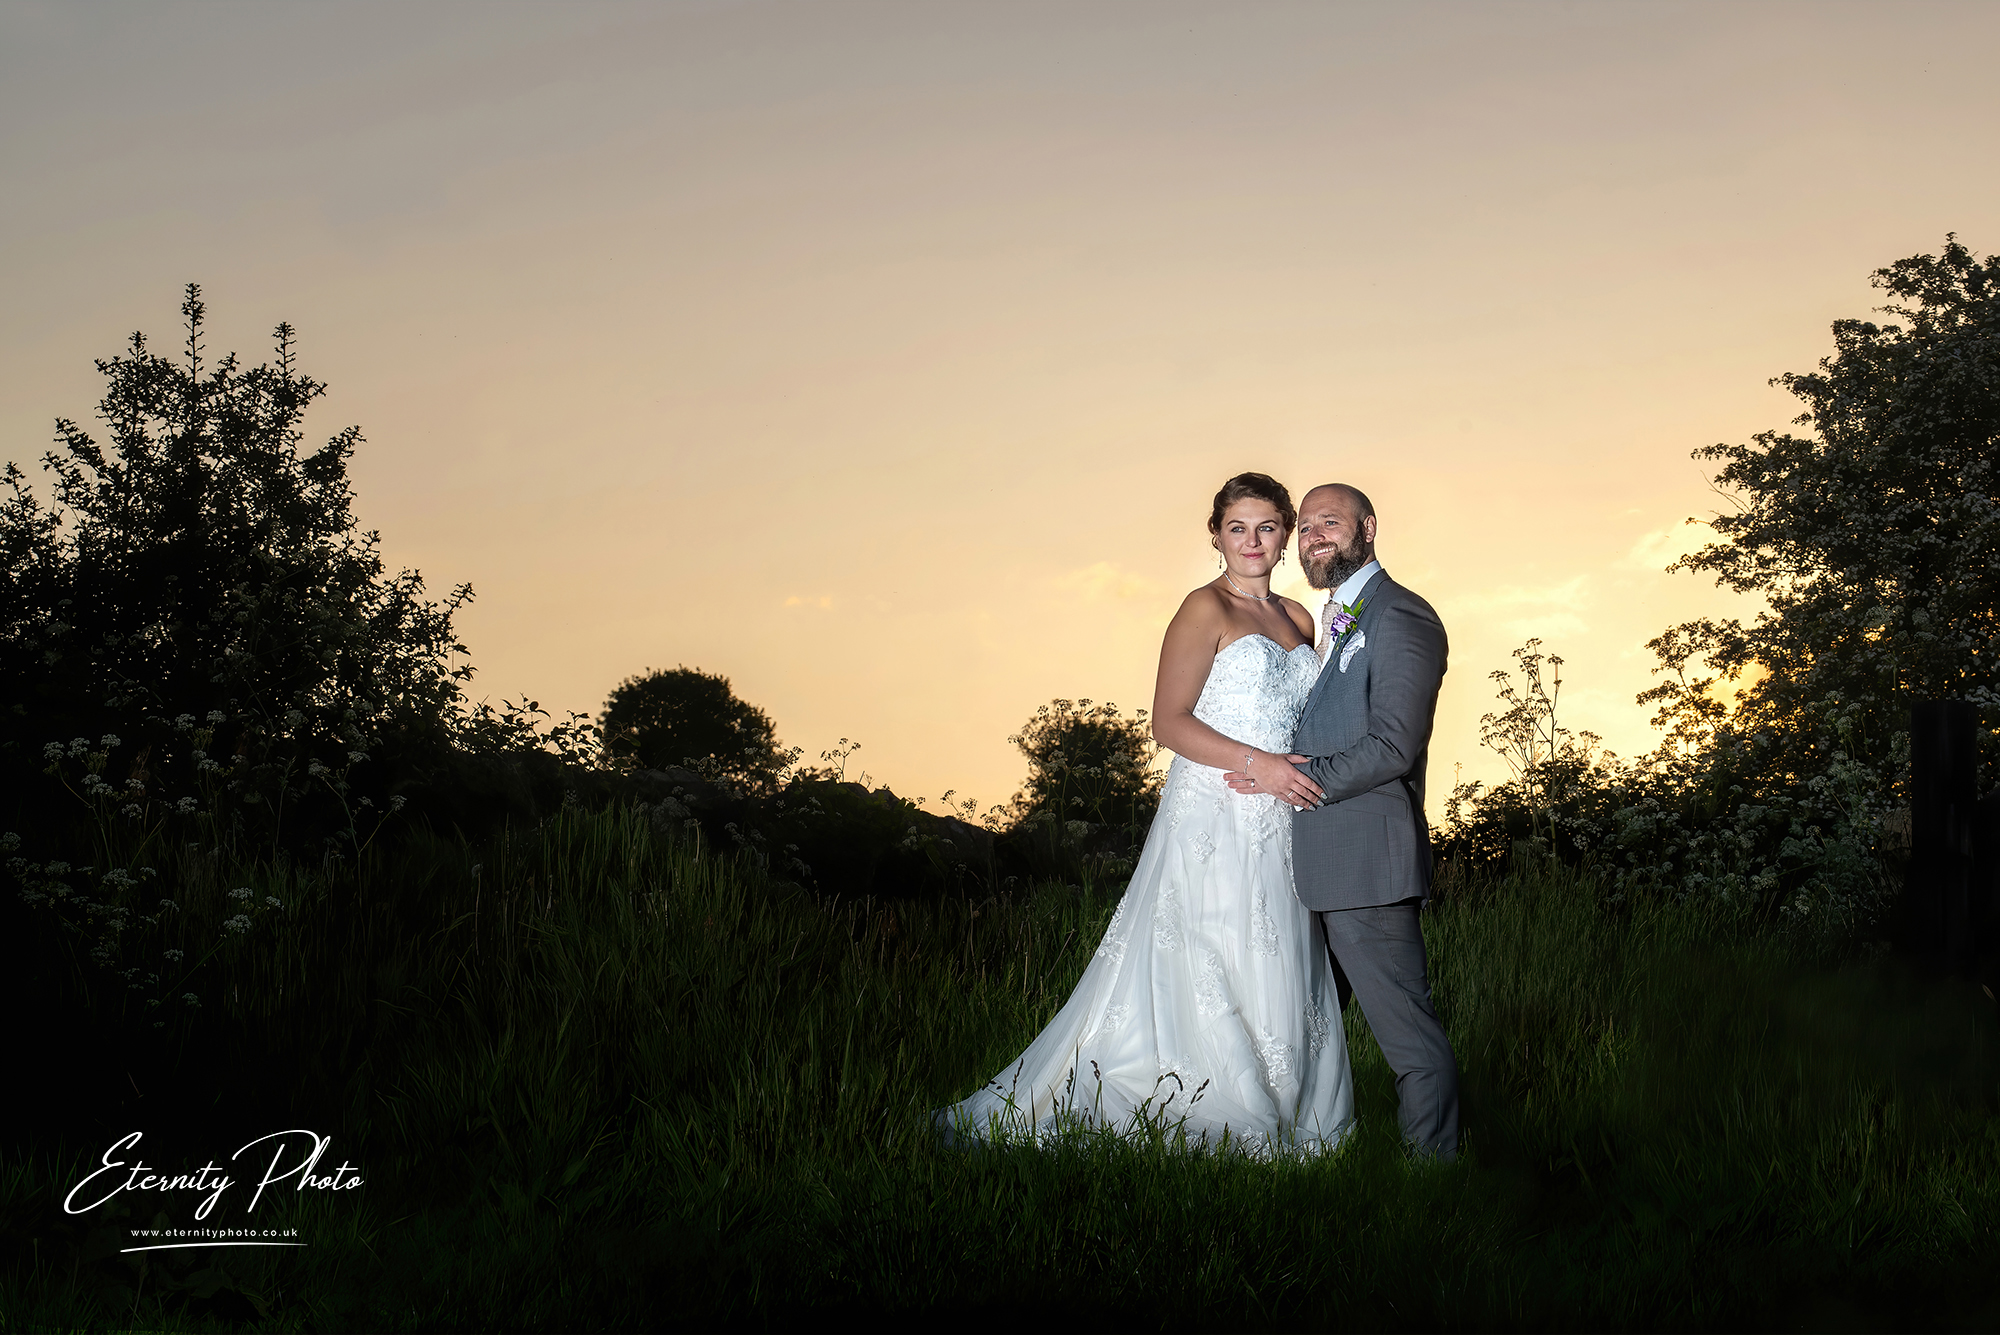 Couple in wedding attire during sunset in a field.